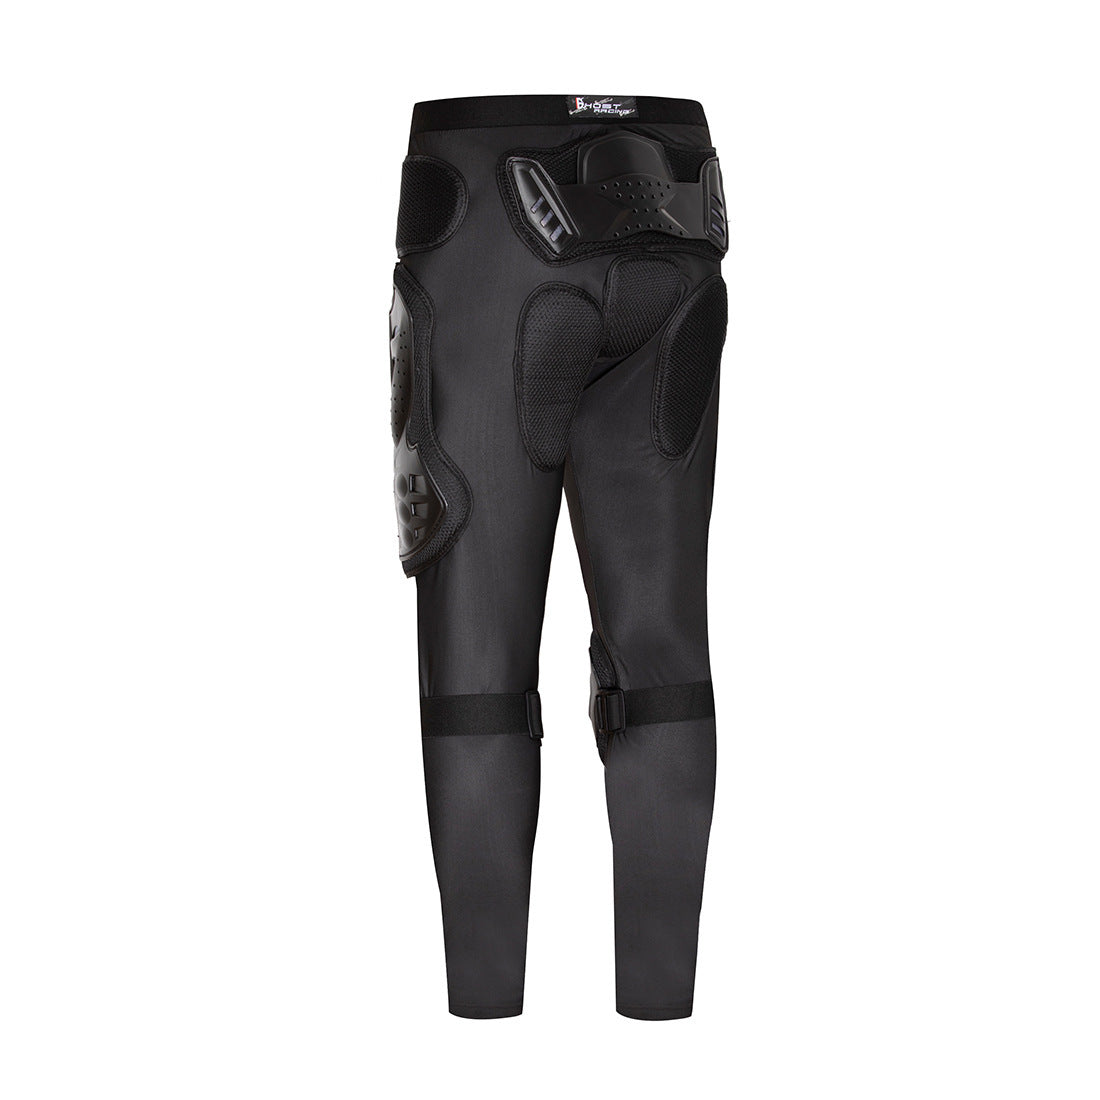 Motorcycle Riding Armor Pants - Breathable Lycra Anti-Fall Pants for Cycling, Hiking, and Extreme Sports - Carvan Mart